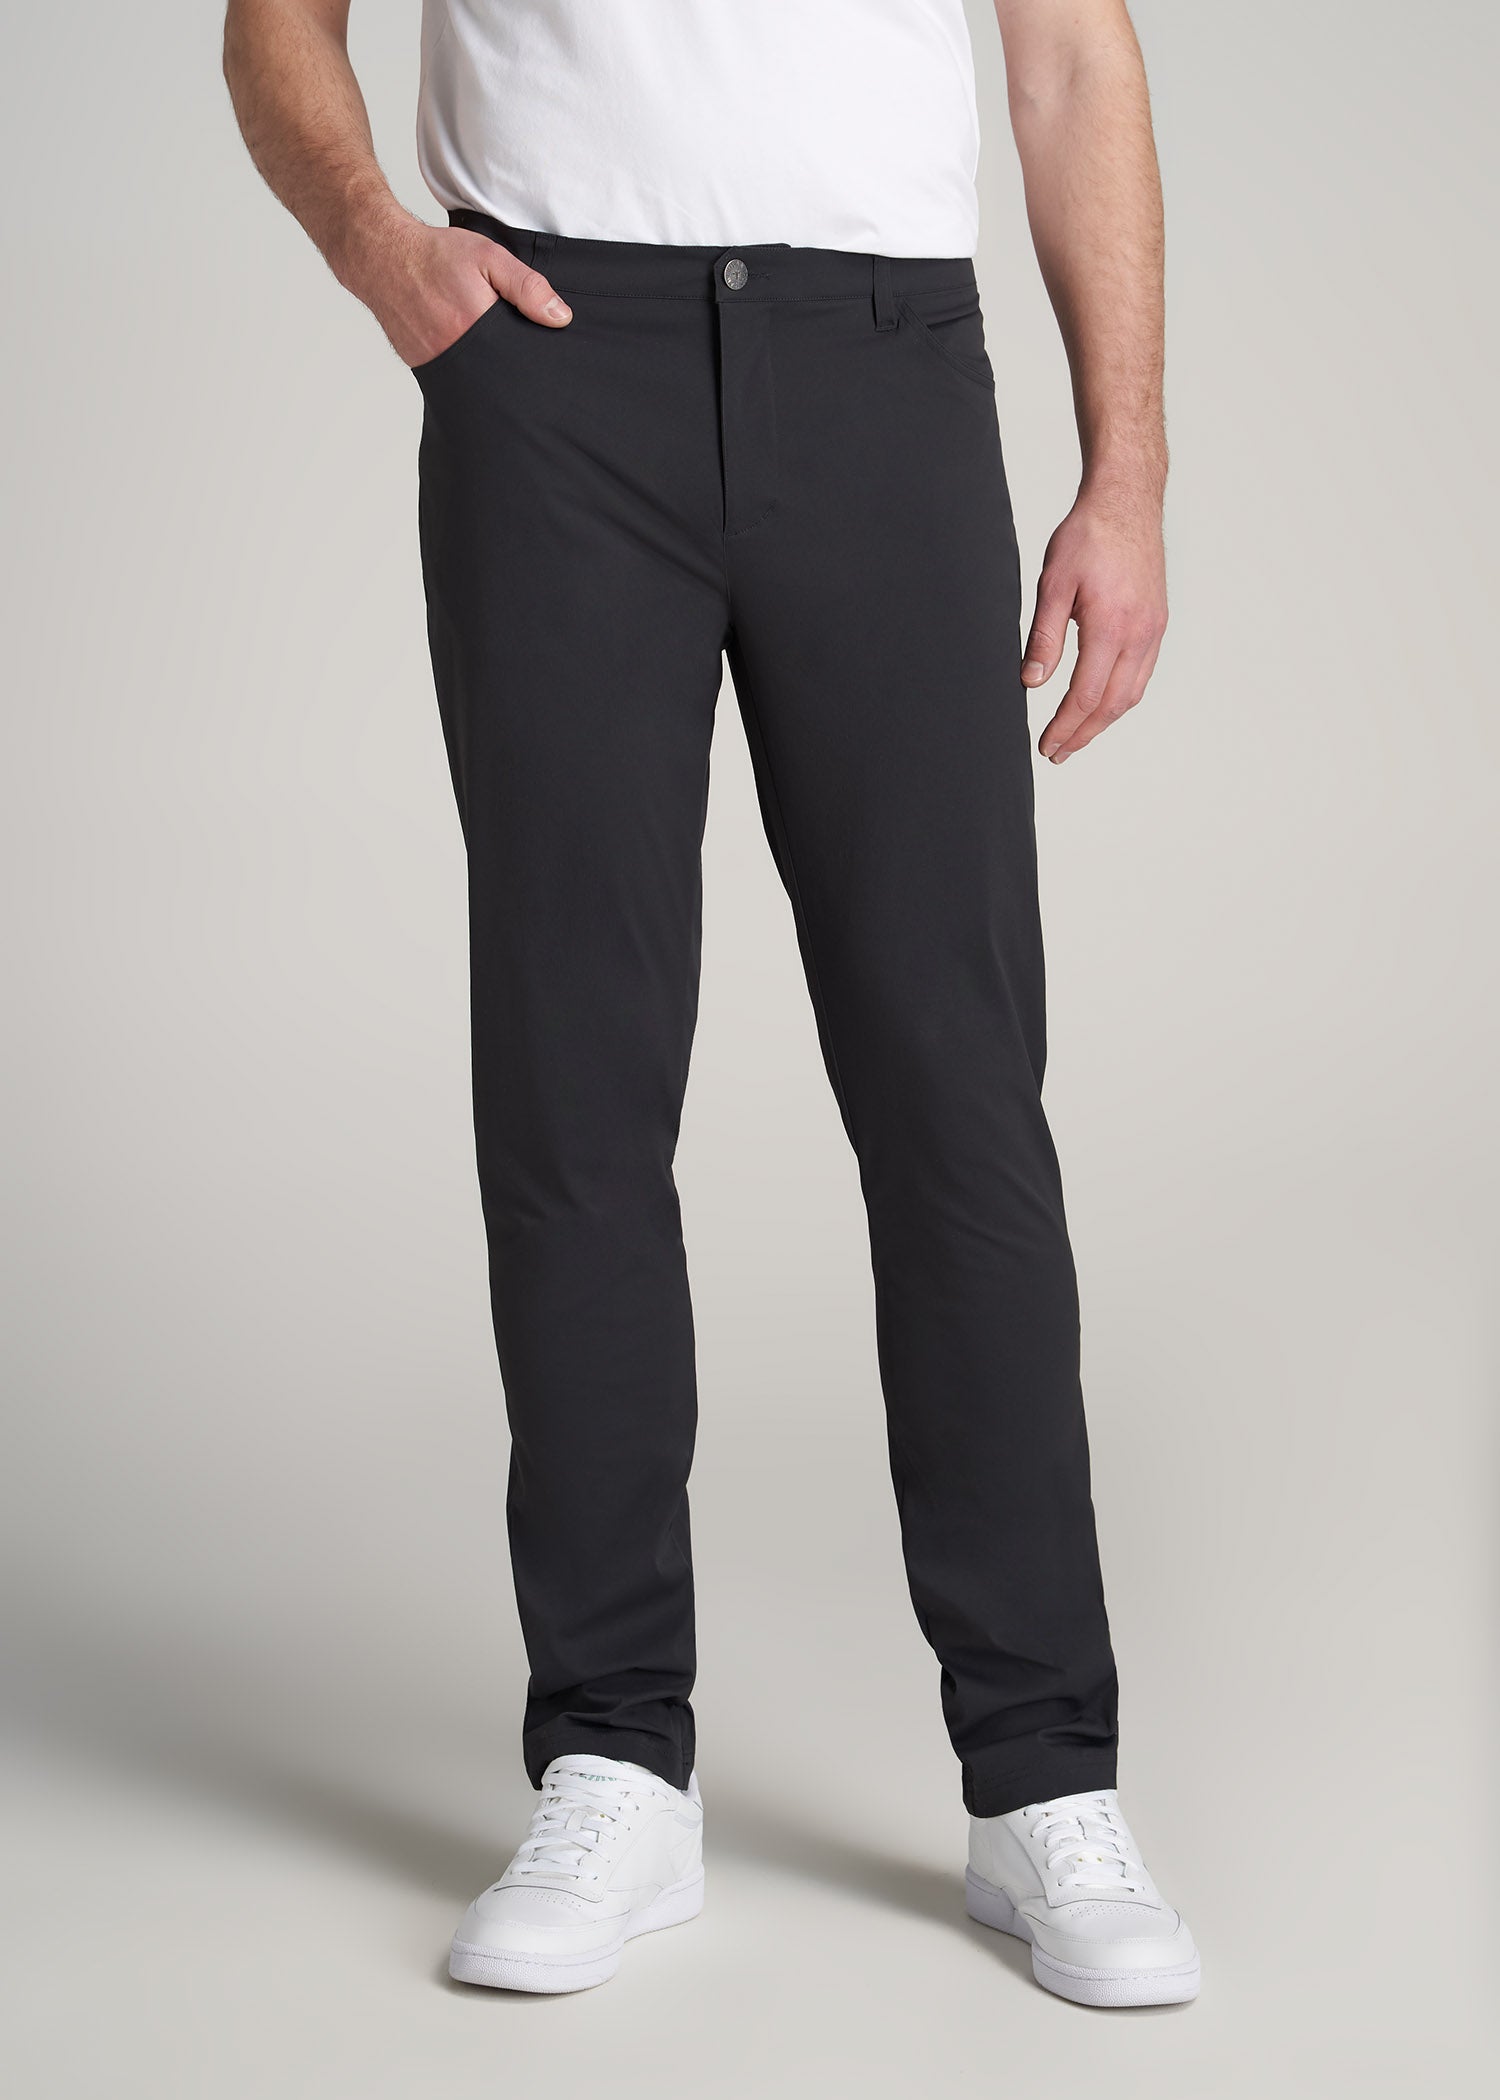 TAPERED-FIT Traveler Pants for Tall Men in Black